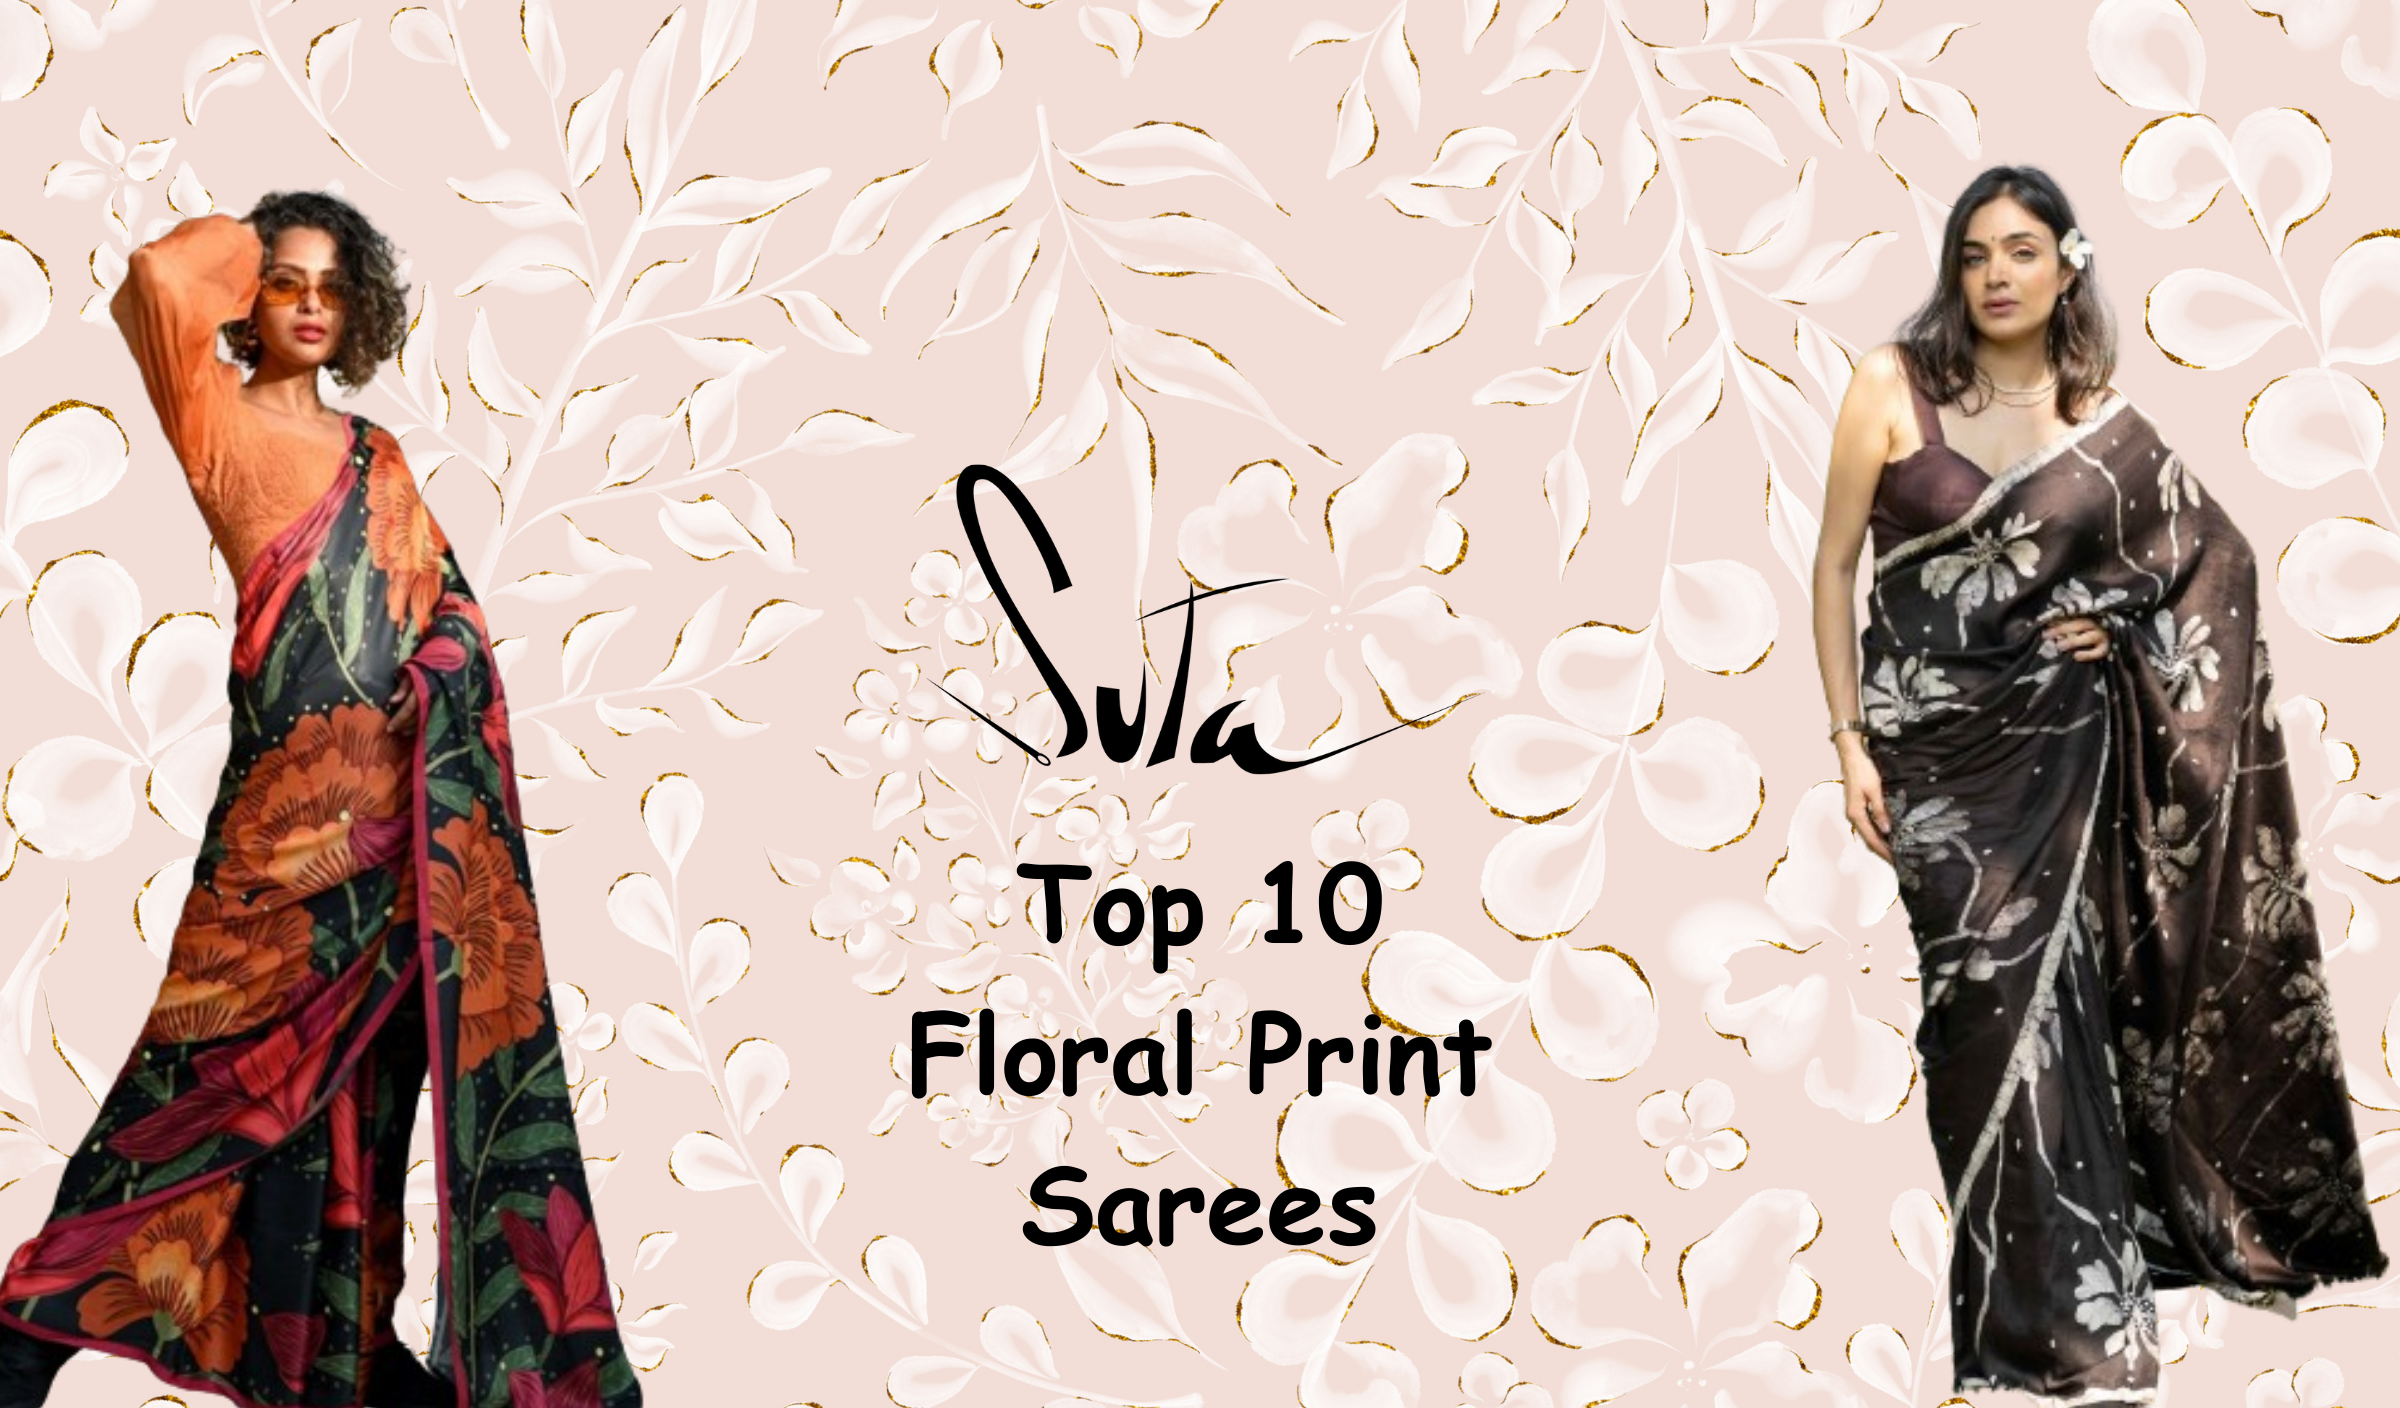 Top 10 Floral Print Sarees from Suta: A Blossoming Affair of Style